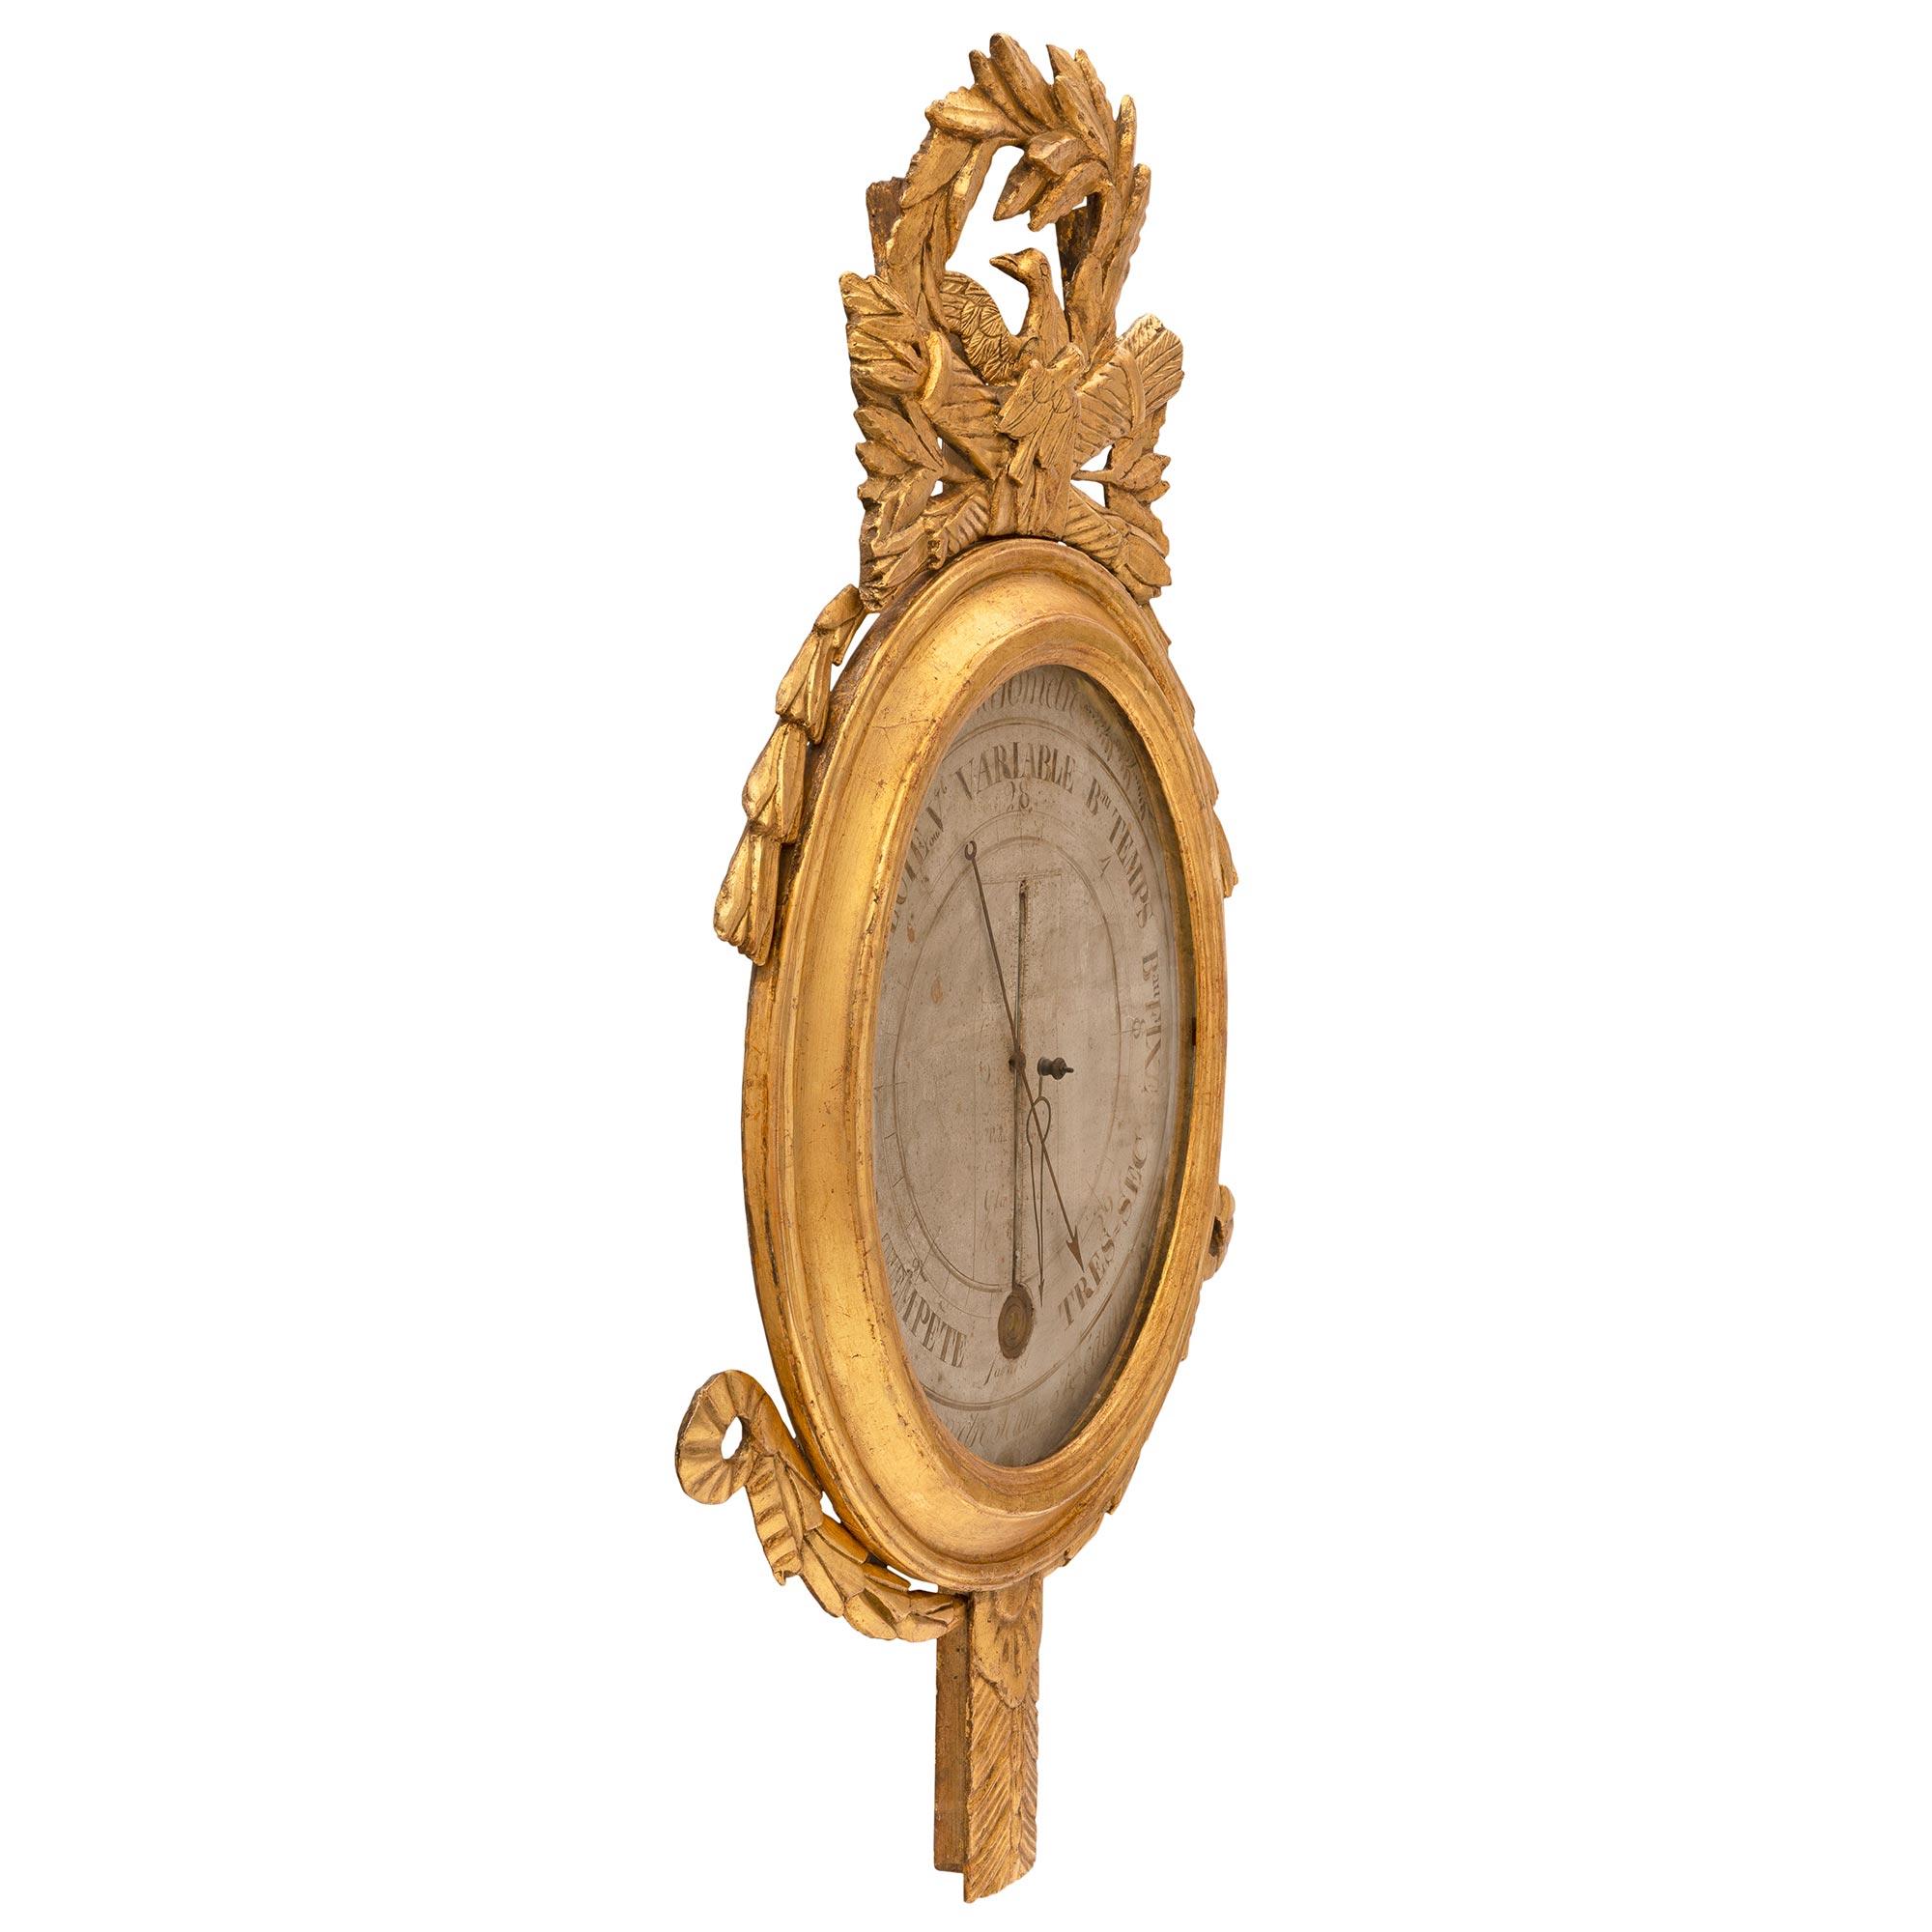 An elegant and extremely decorative French 18th century Louis XVI period giltwood barometer thermometer. The most decorative barometer thermometer retains its original glass pane enclosing the display. The background is decorated with the original